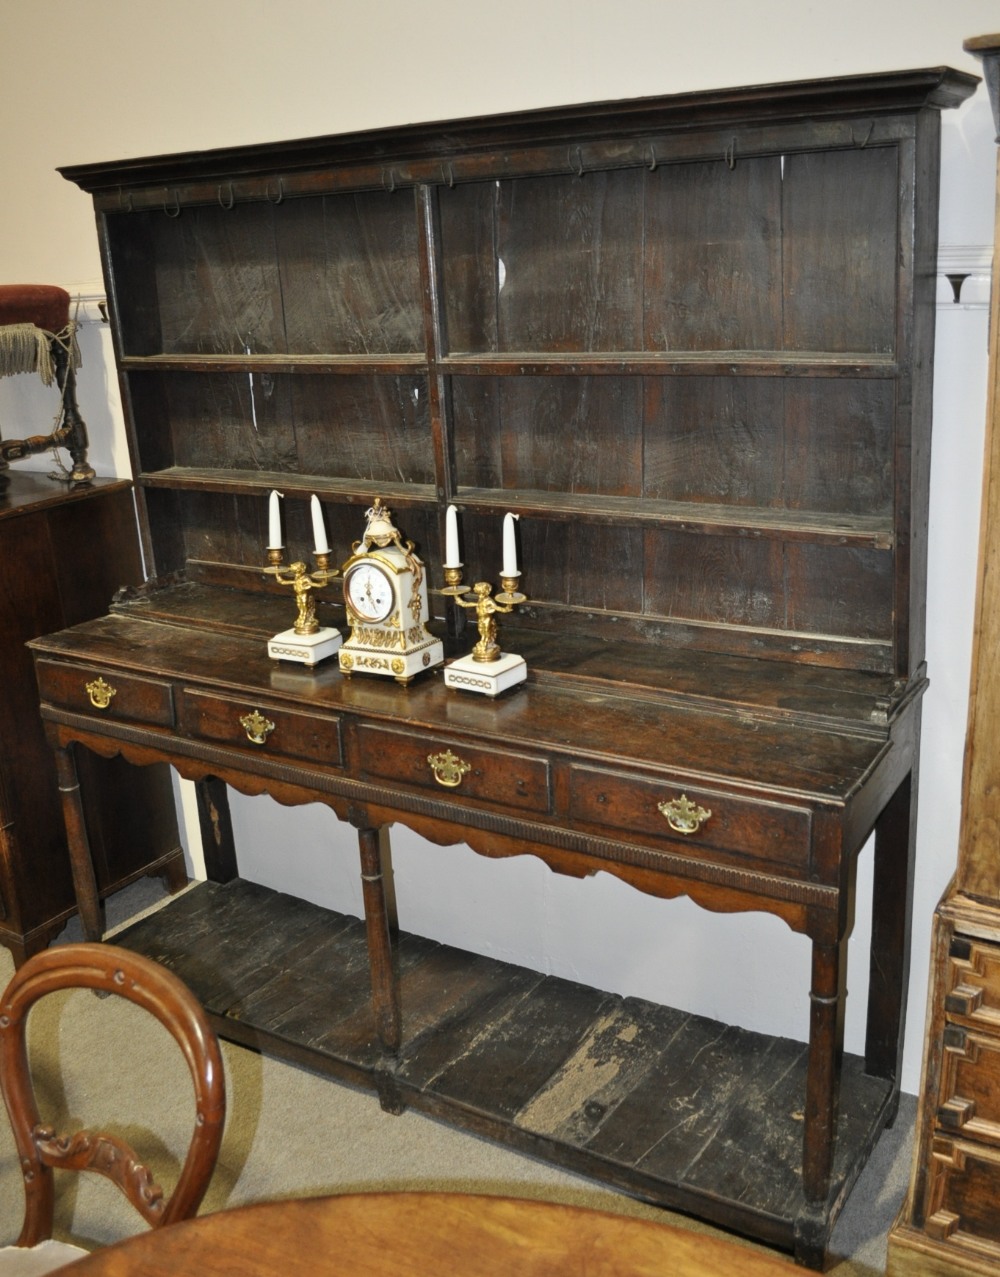 17/18th century joined oak dresser with a boarded open plate rack, 4 frieze drawers and pot board